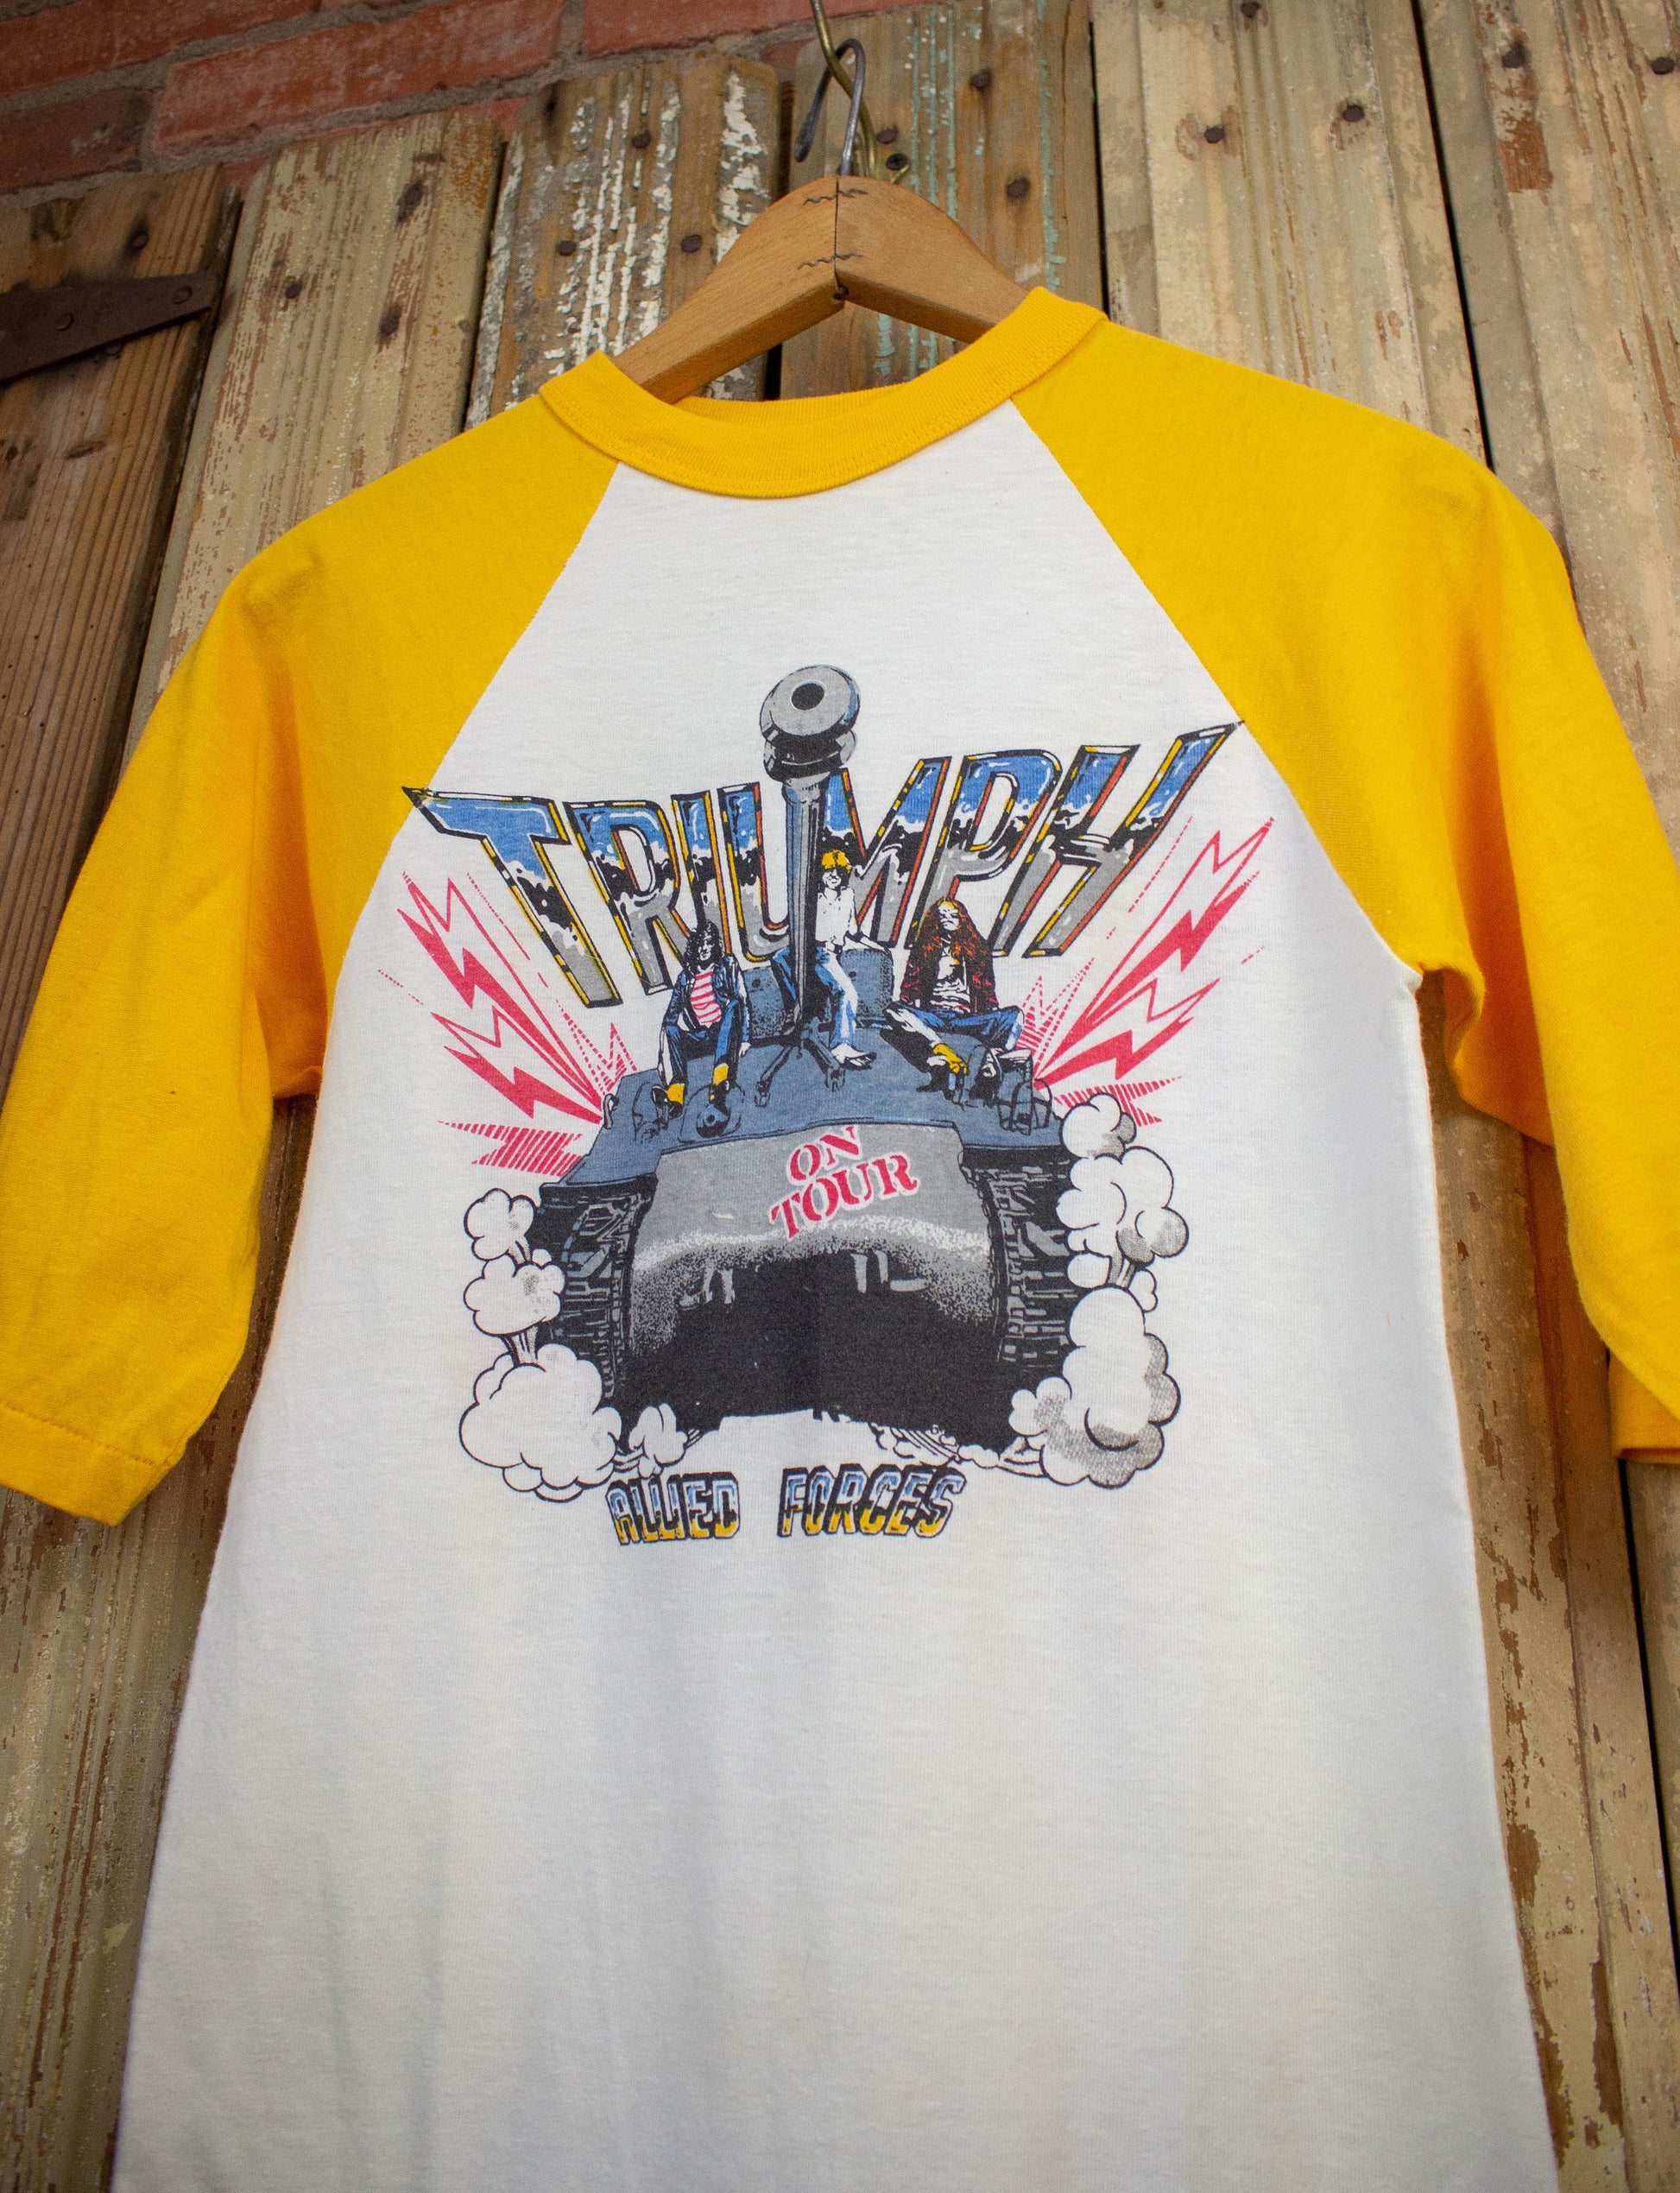 Vintage Triumph Allied Forces Raglan Concert T Shirt 1981 White and Yellow XS